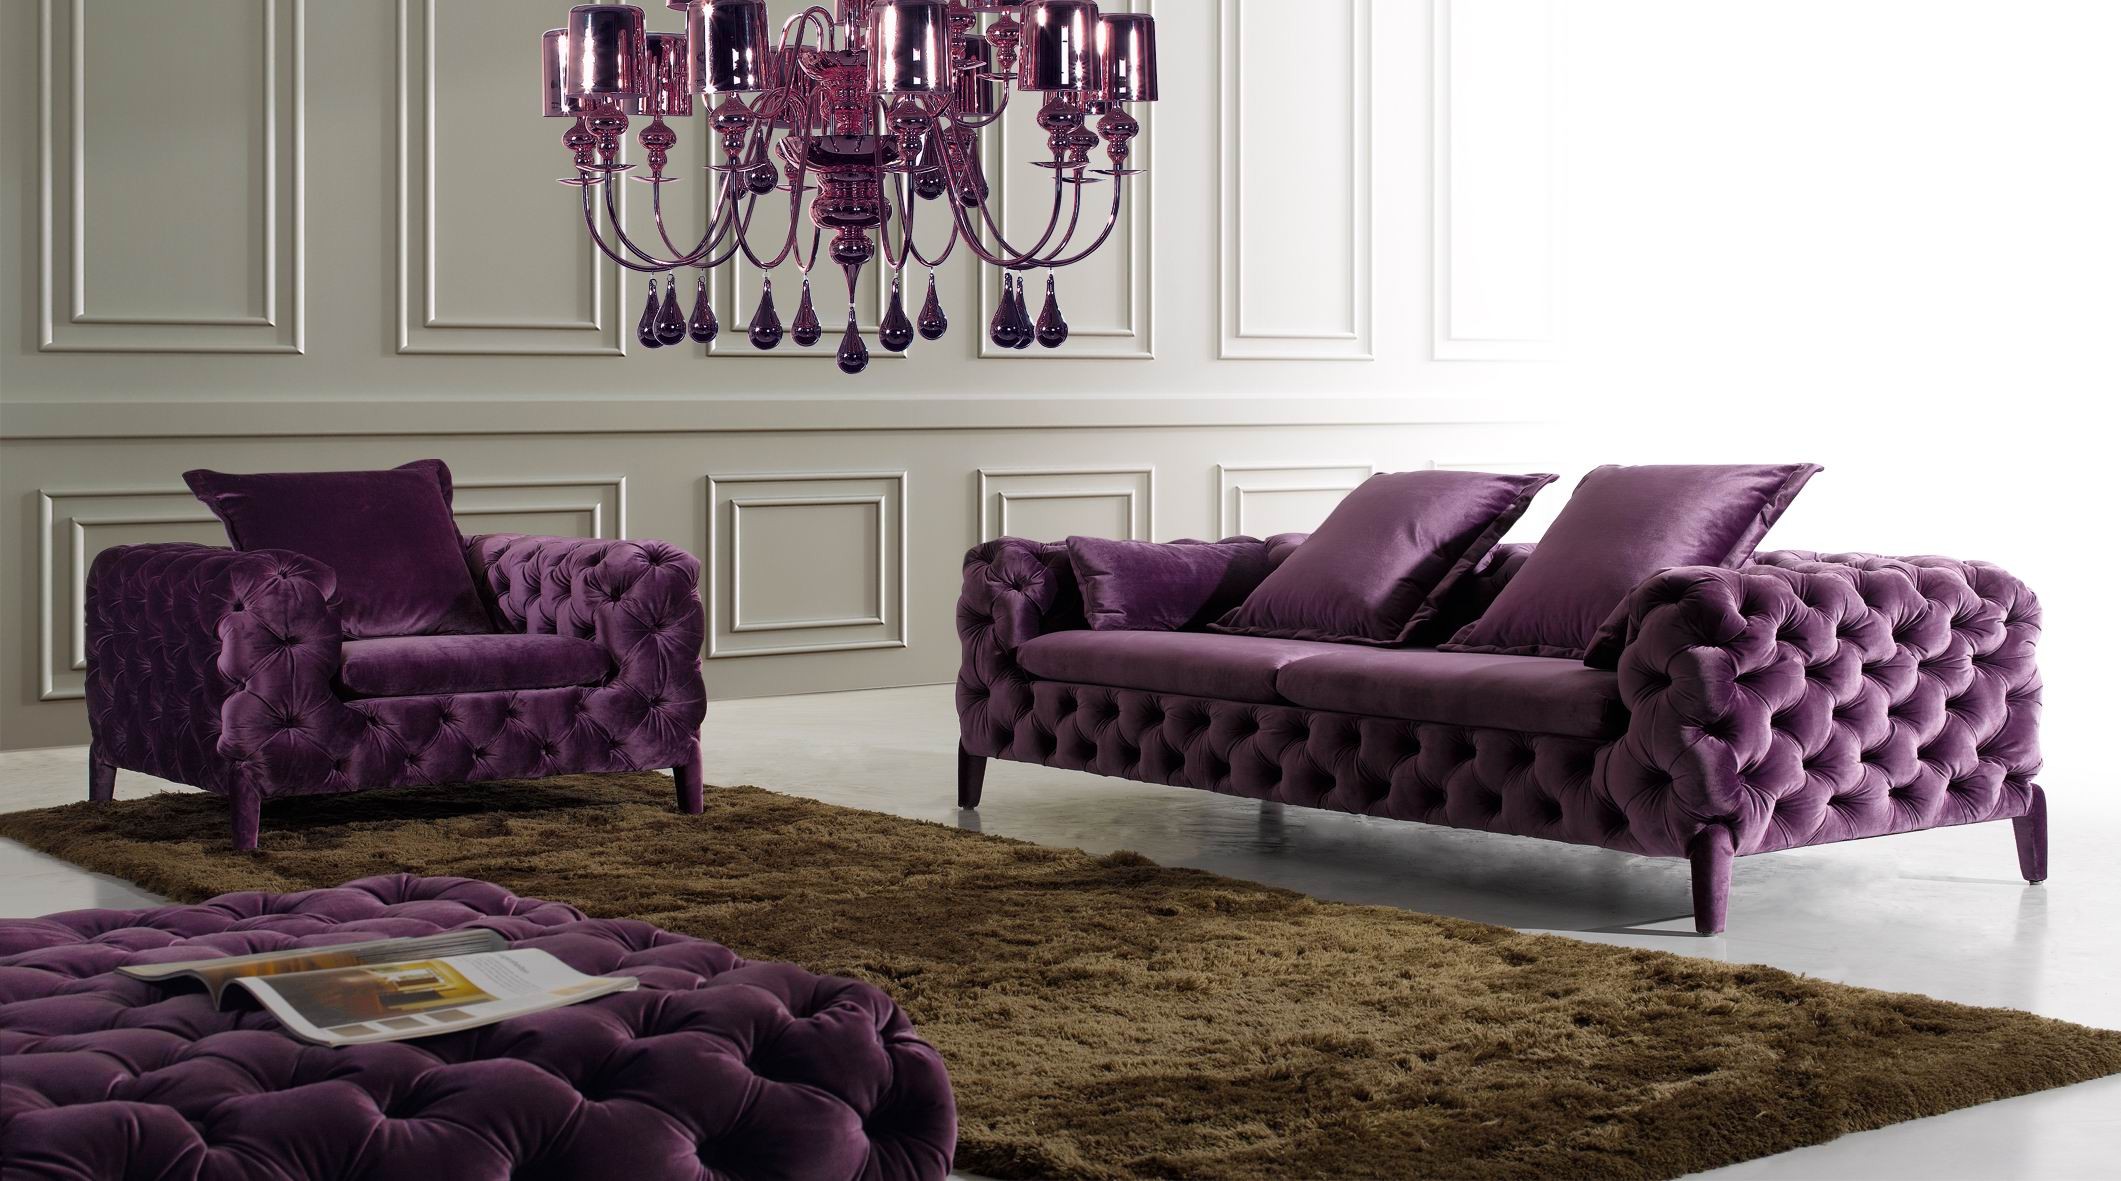 furniture-elegant-purple-upholstered-tufted-velvet-luxury-sofas-with-soft-foam-cushioning-and-sweet-purple-pillow-also-tapered-block-feet-on-area-brown-fur-rug-as-well-as-sofa-stores-and-discount-furn.jpg